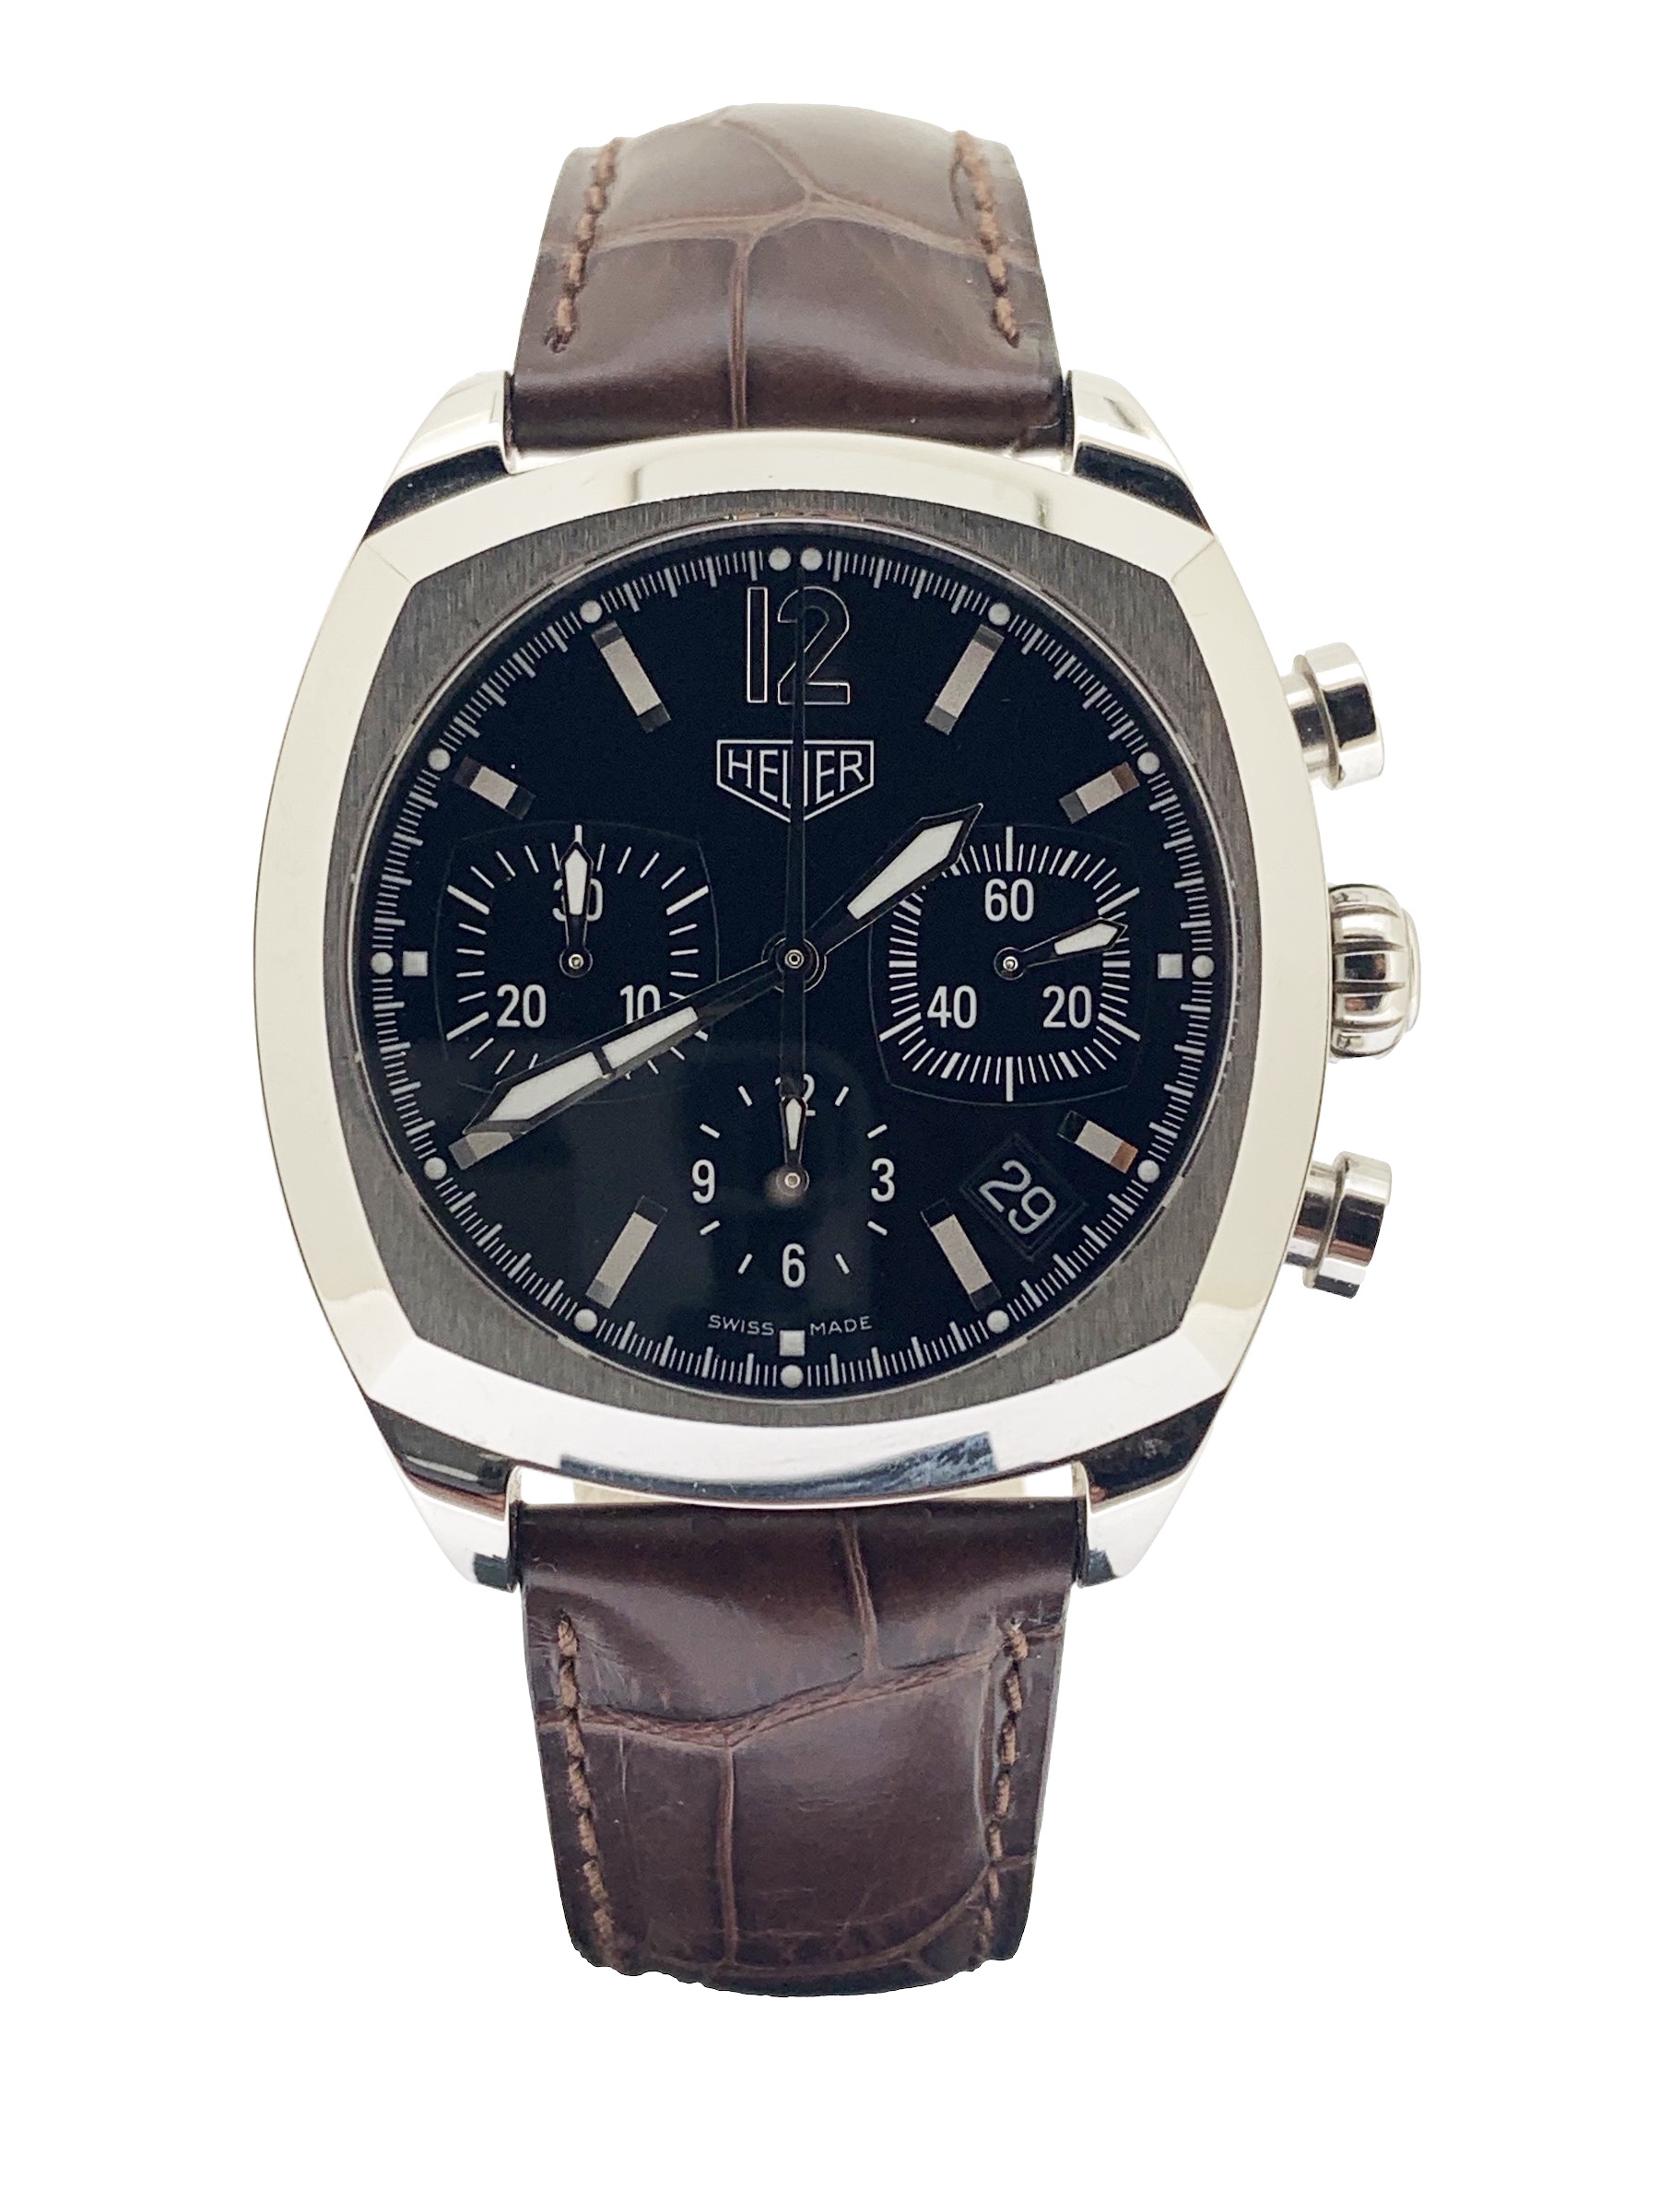 Tag Heuer | Monza | Chronograph | Front